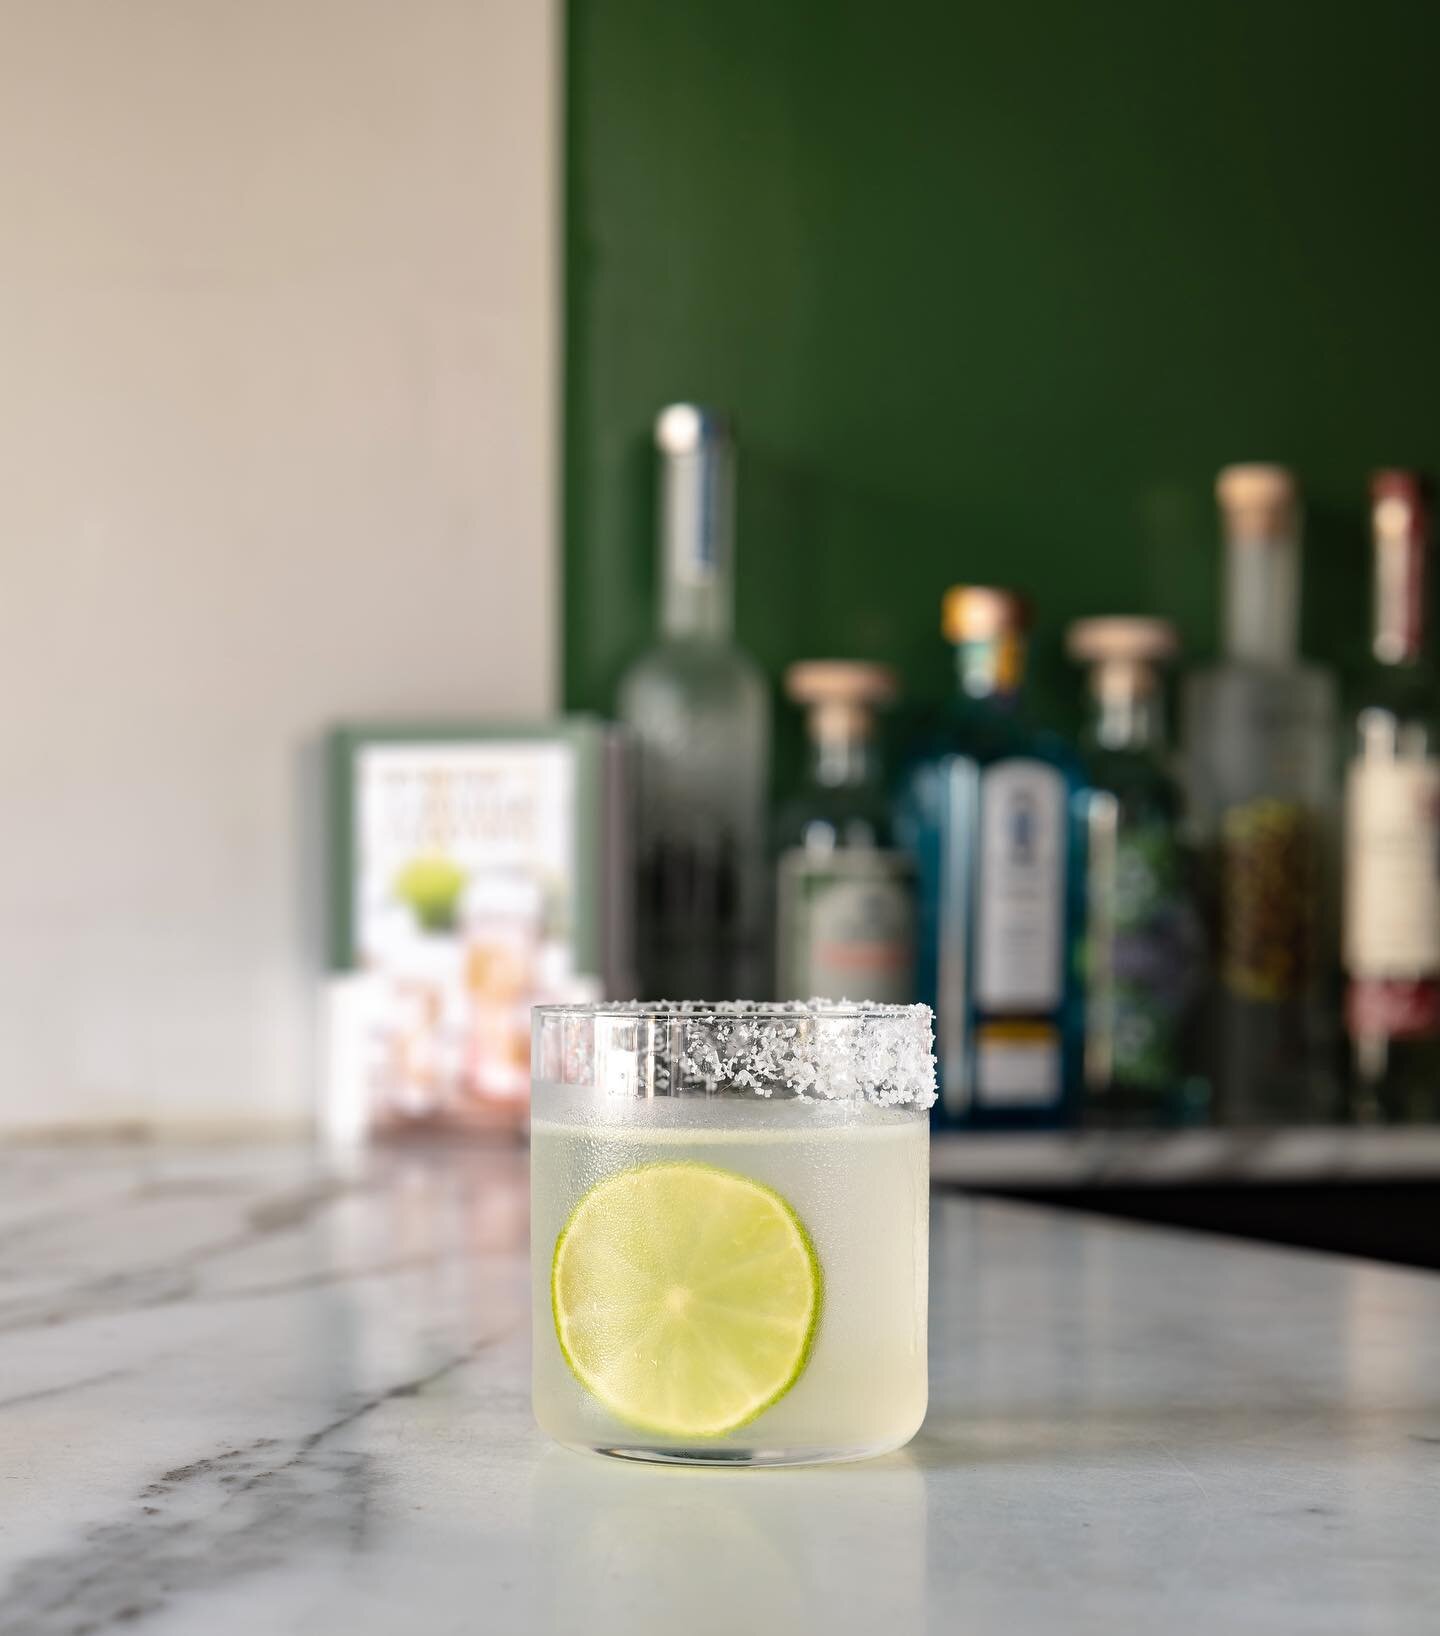 Margarita

Ocho tequila - Orange liqueur - Lime

For the orange liqueur we cut Merlet Trois Citrus with sugar syrup and add a tiny touch of Orange flower water and salt. We want the tequila to shine so adding a little less Orange liqueur makes for a 